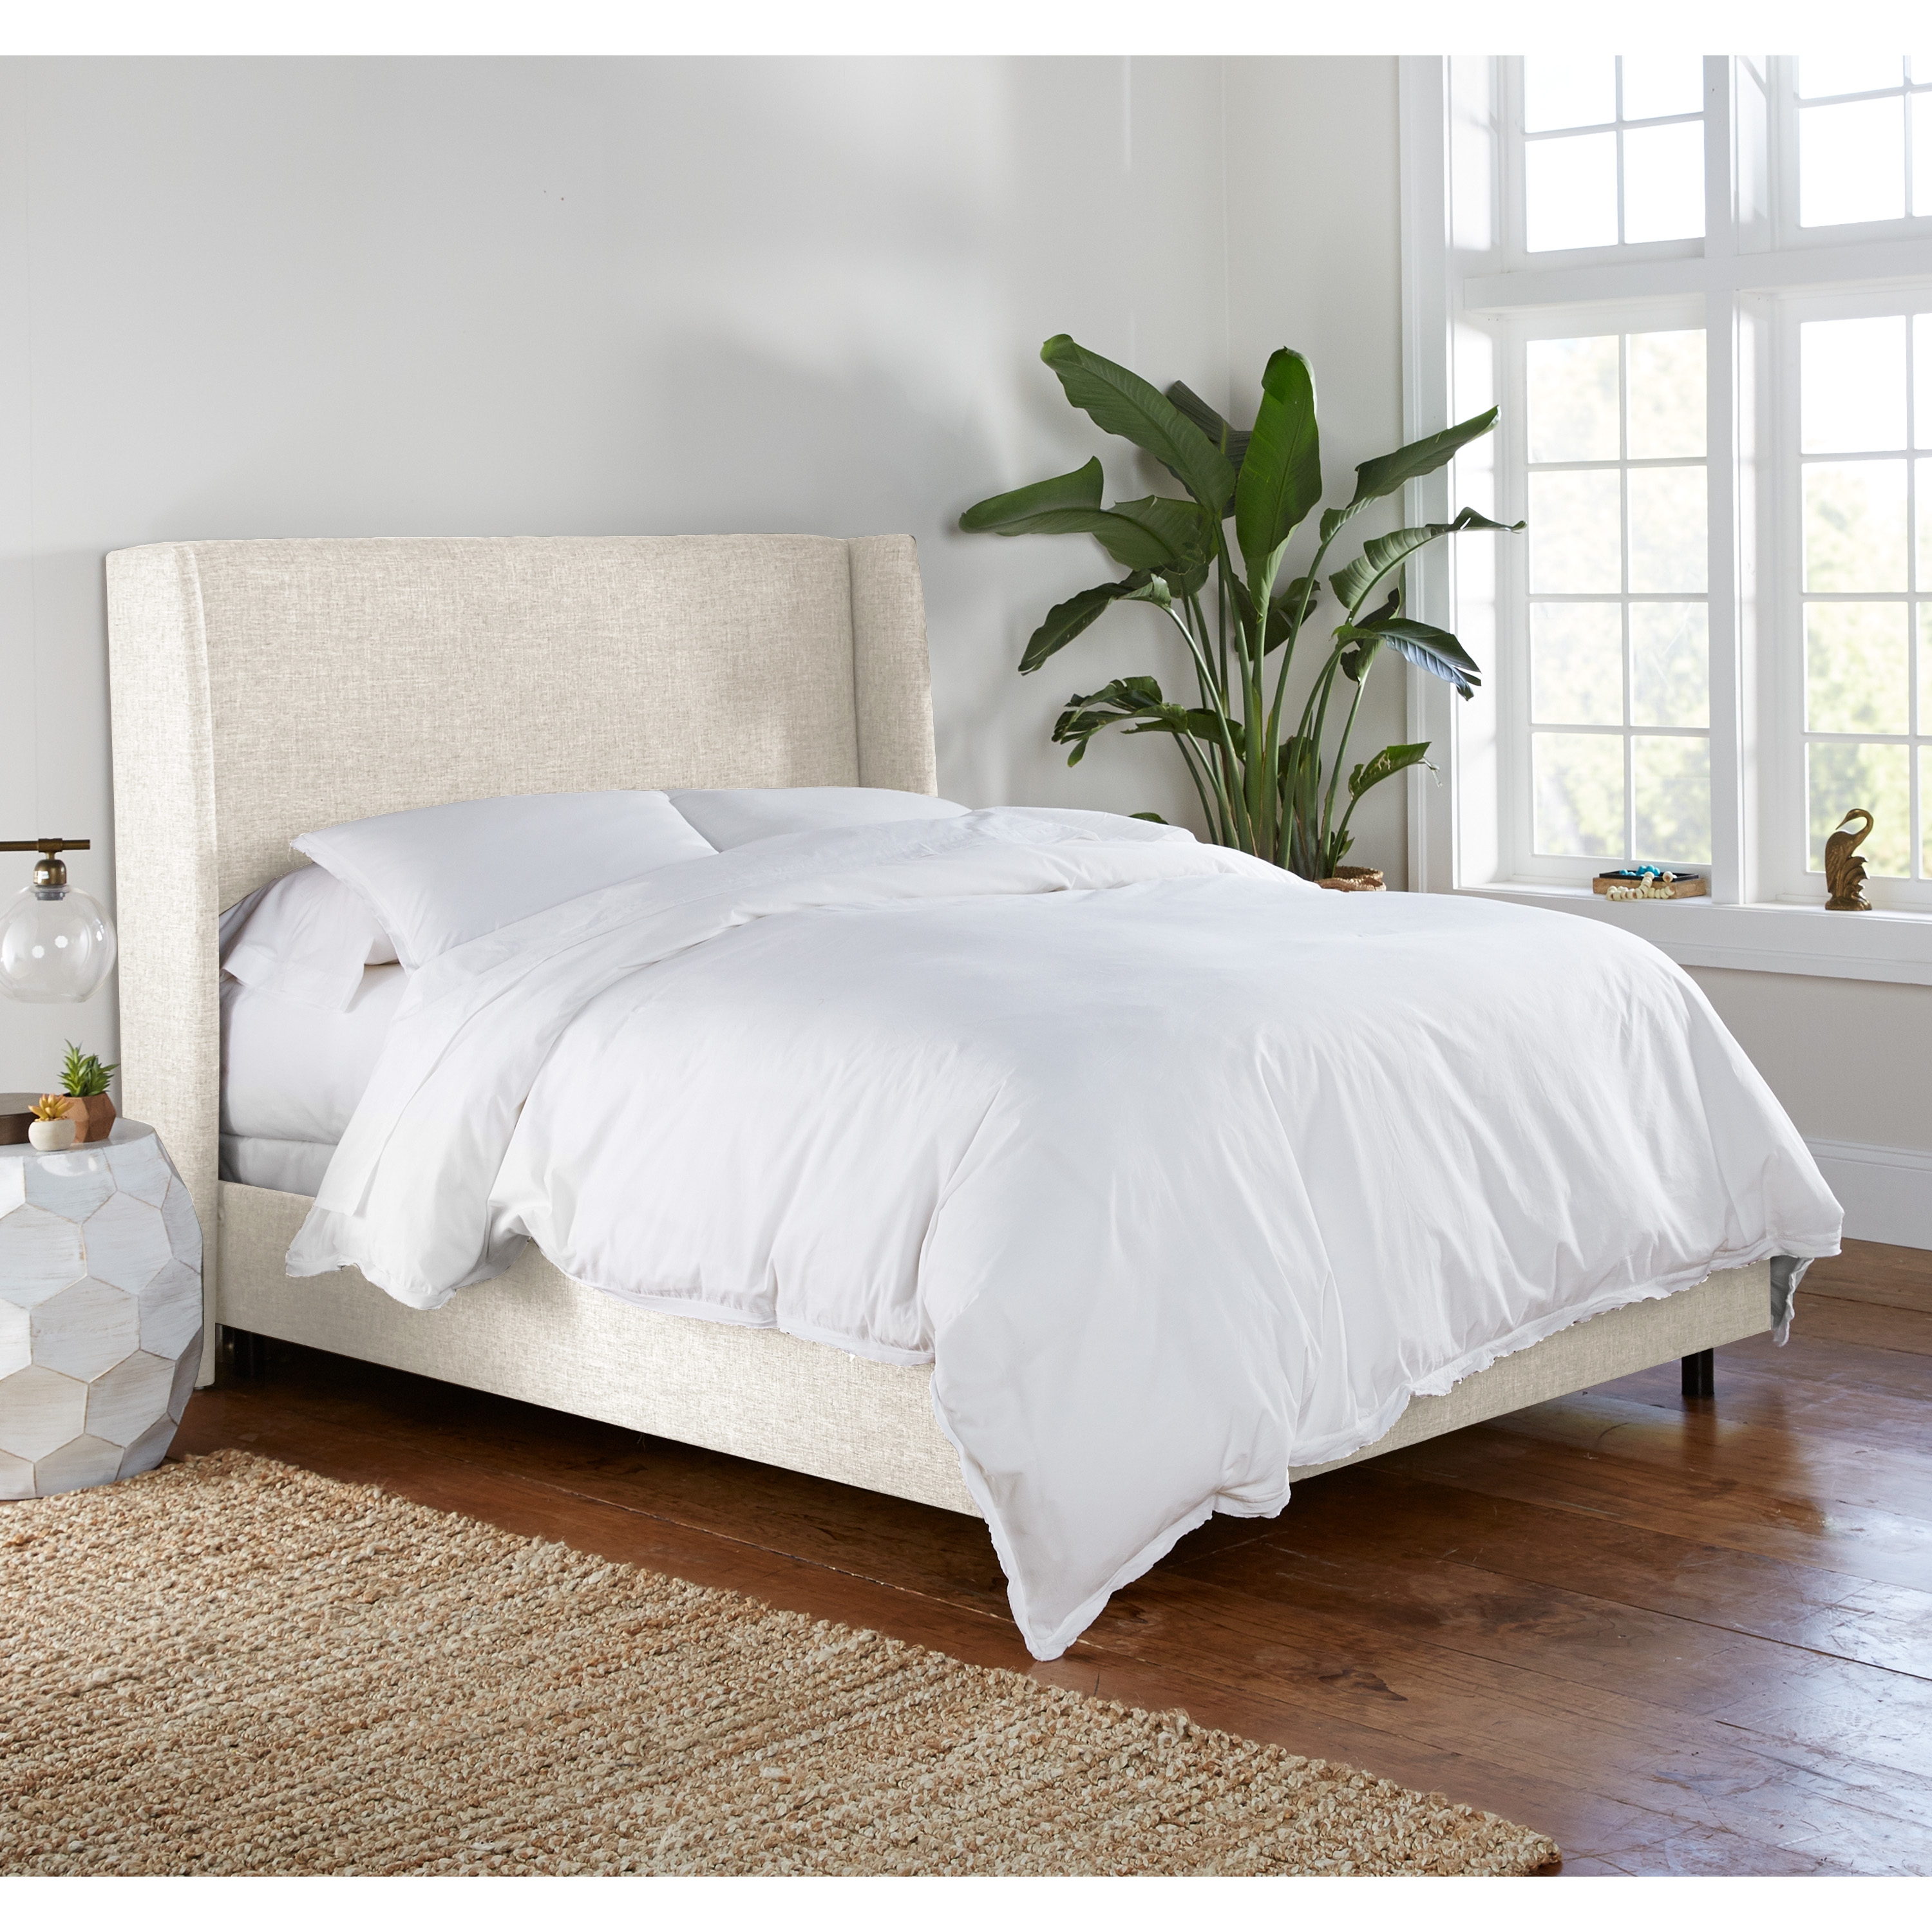 Bannock Wingback Bed, Queen, White - Image 5